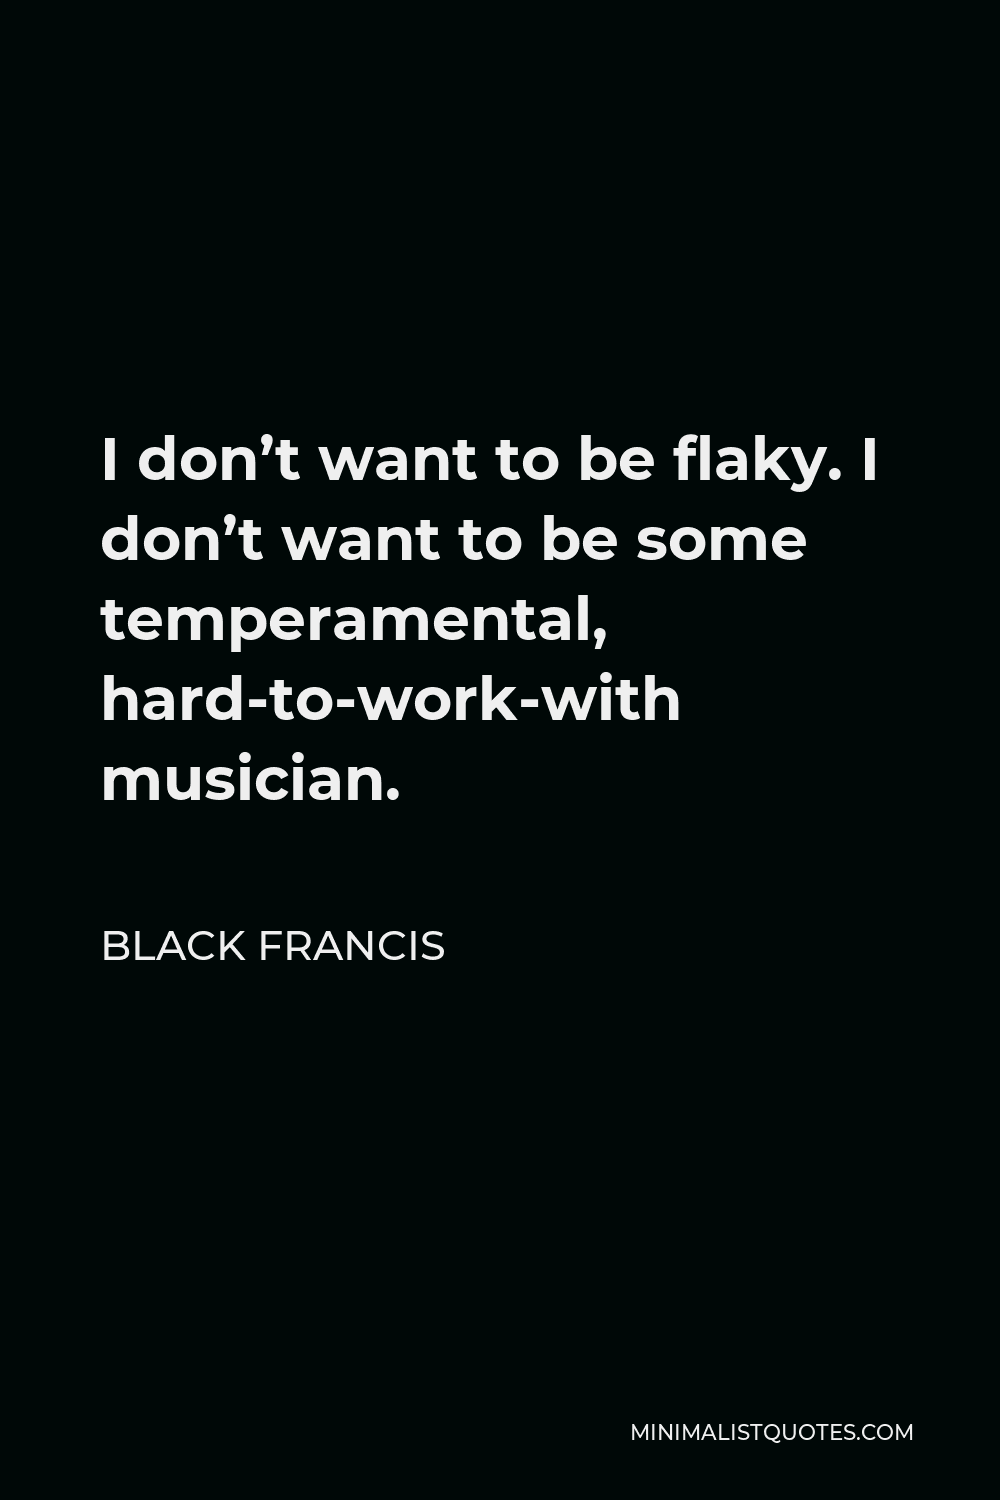 Black Francis Quote - I don’t want to be flaky. I don’t want to be some temperamental, hard-to-work-with musician.